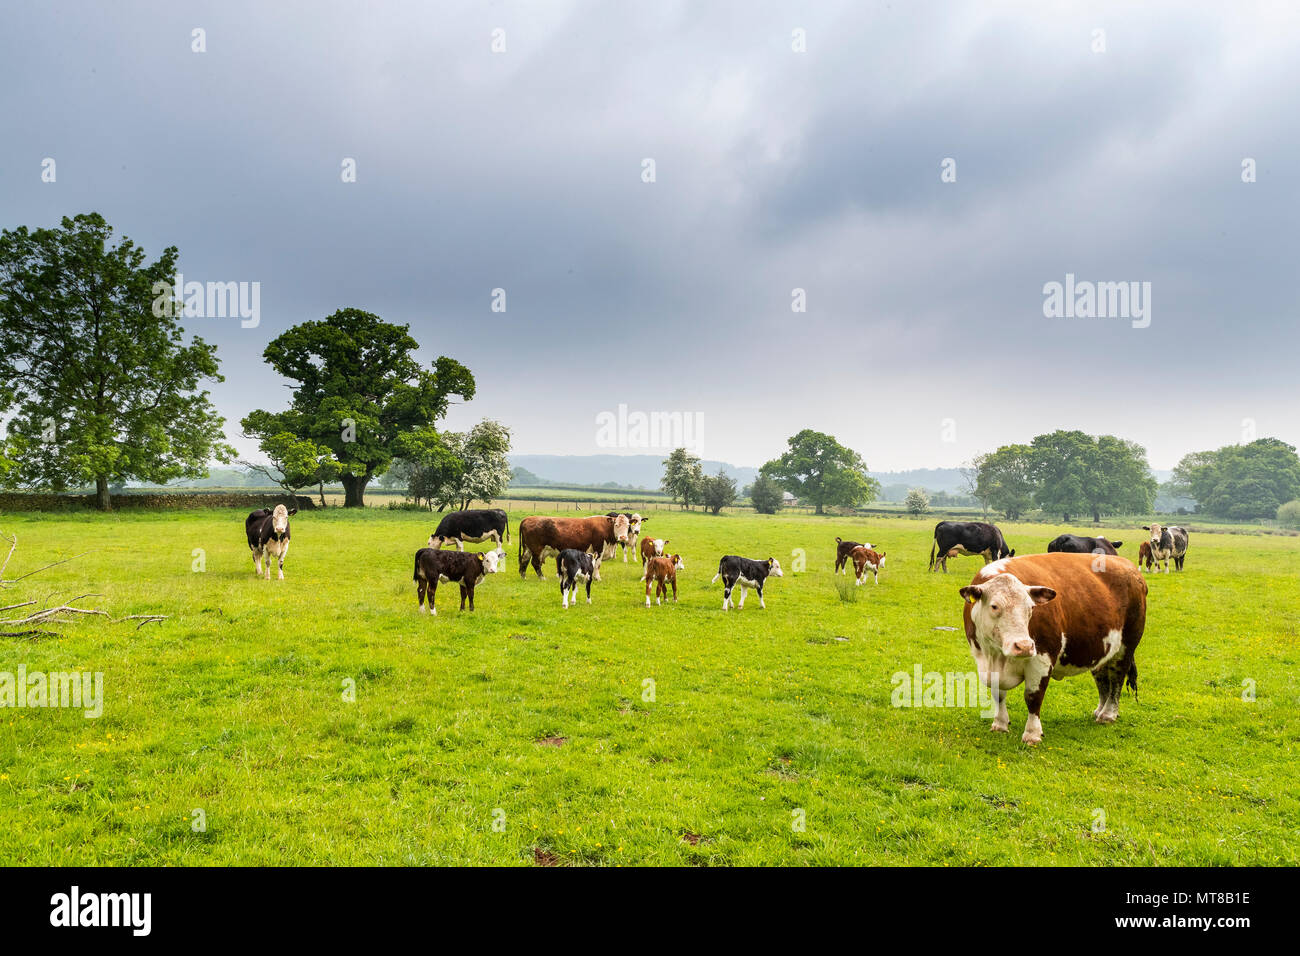 Cattle herd, farming. Humble by Nature May 2018 Stock Photo